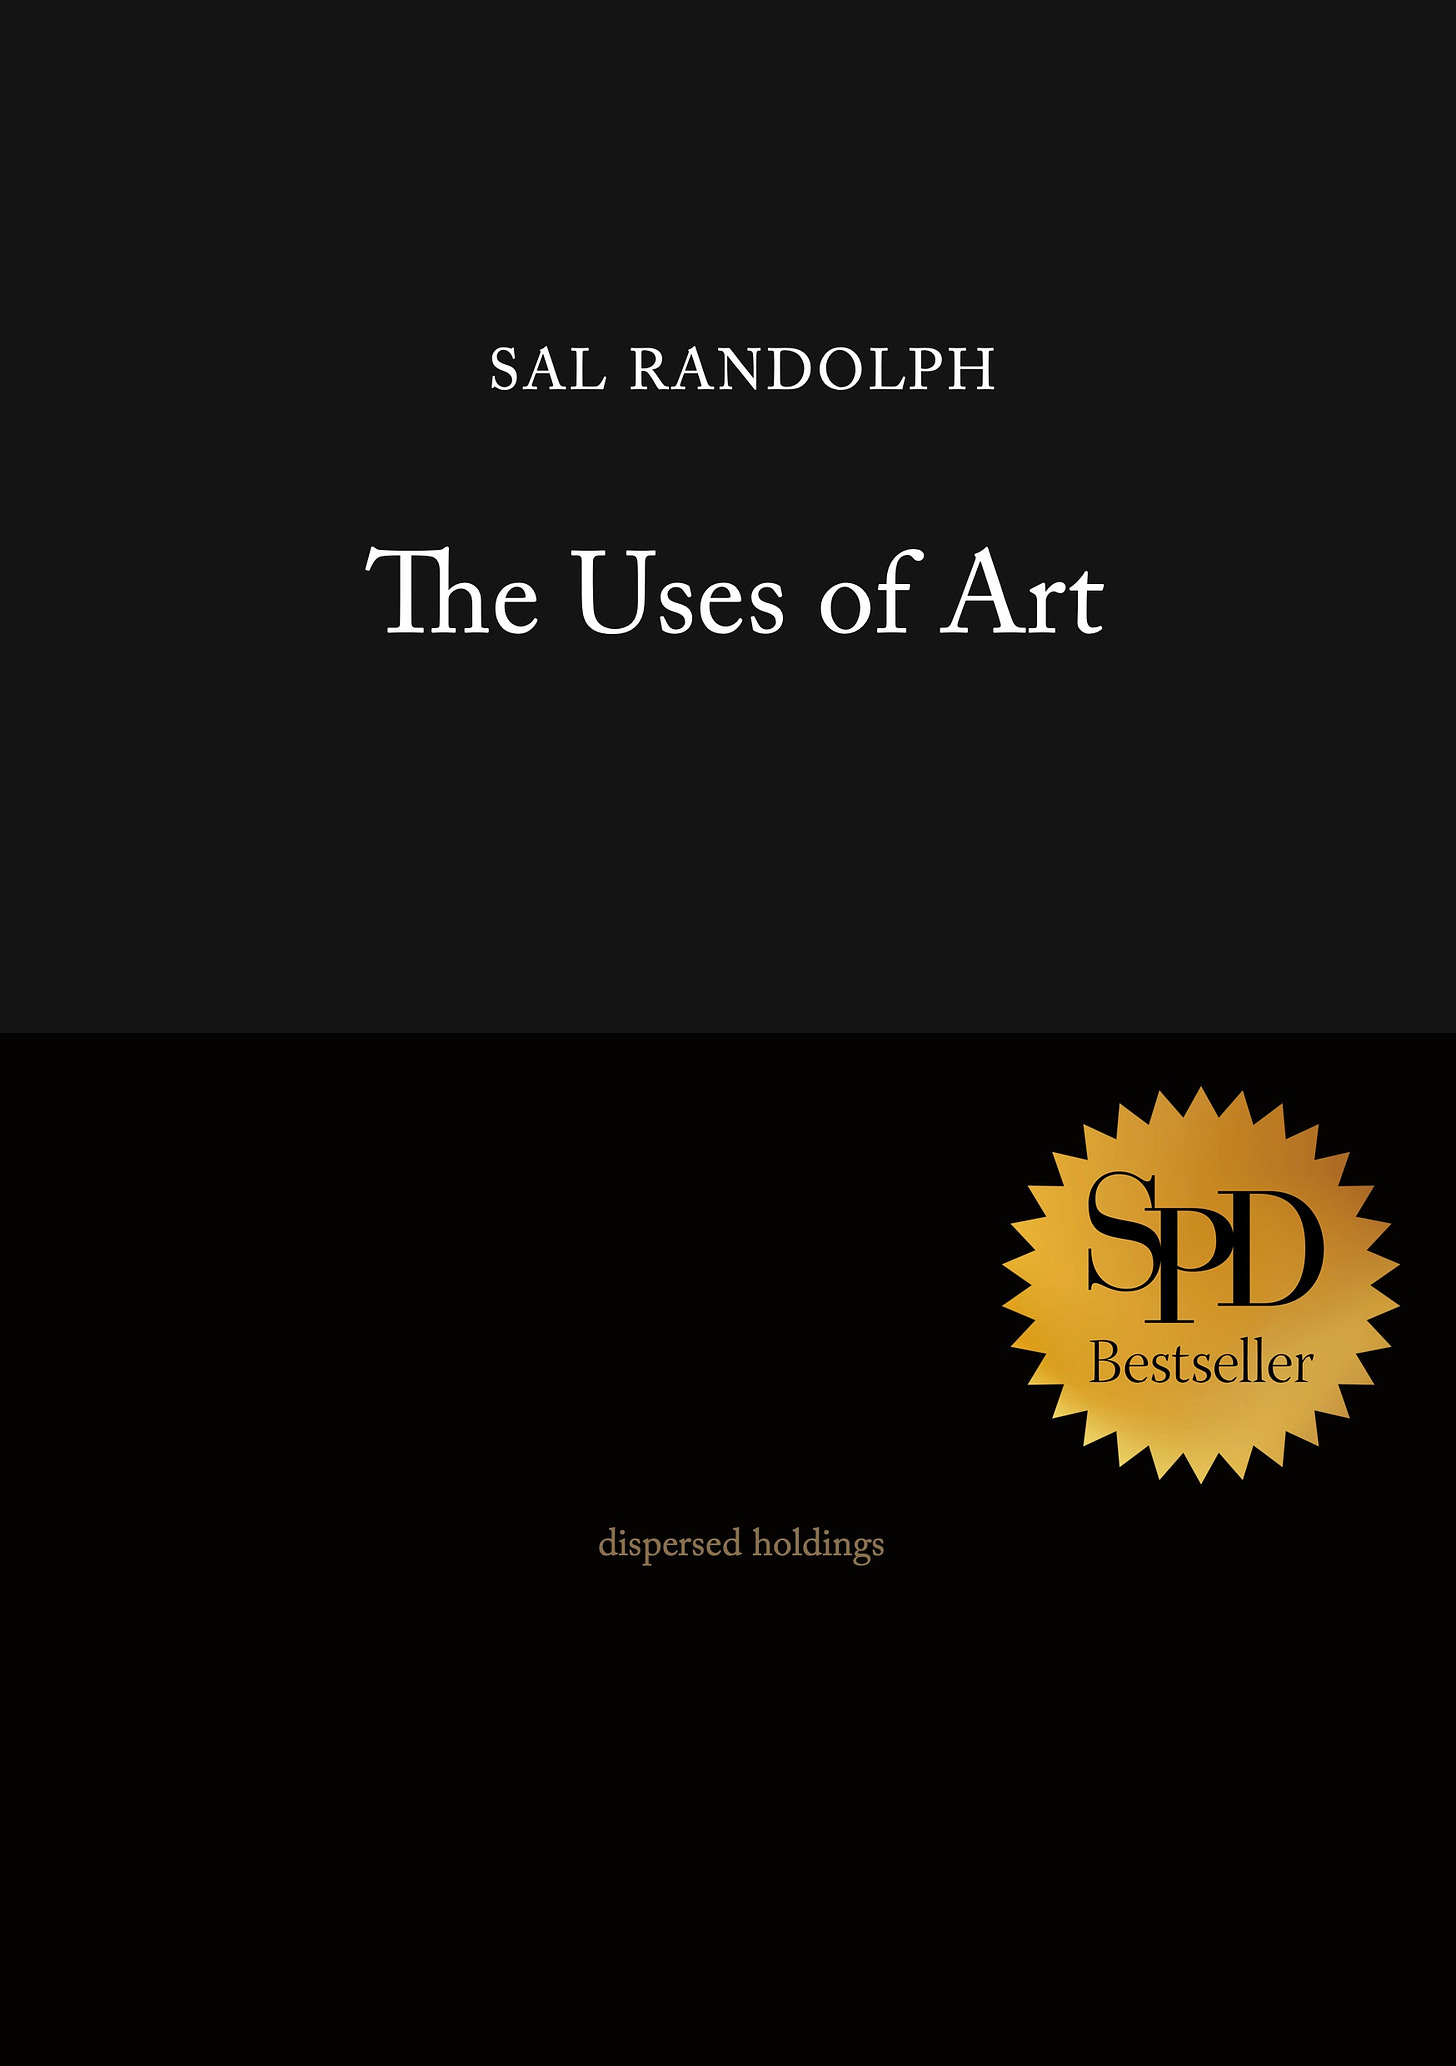 Front cover of The Uses of Art by Sal Randolph. The cover is black on black with white text, and there is a gold badge that says SPD Bestseller.Front cover of The Uses of Art by Sal Randolph. The cover is black on black with white text, and there is a gold badge that says SPD Bestseller.